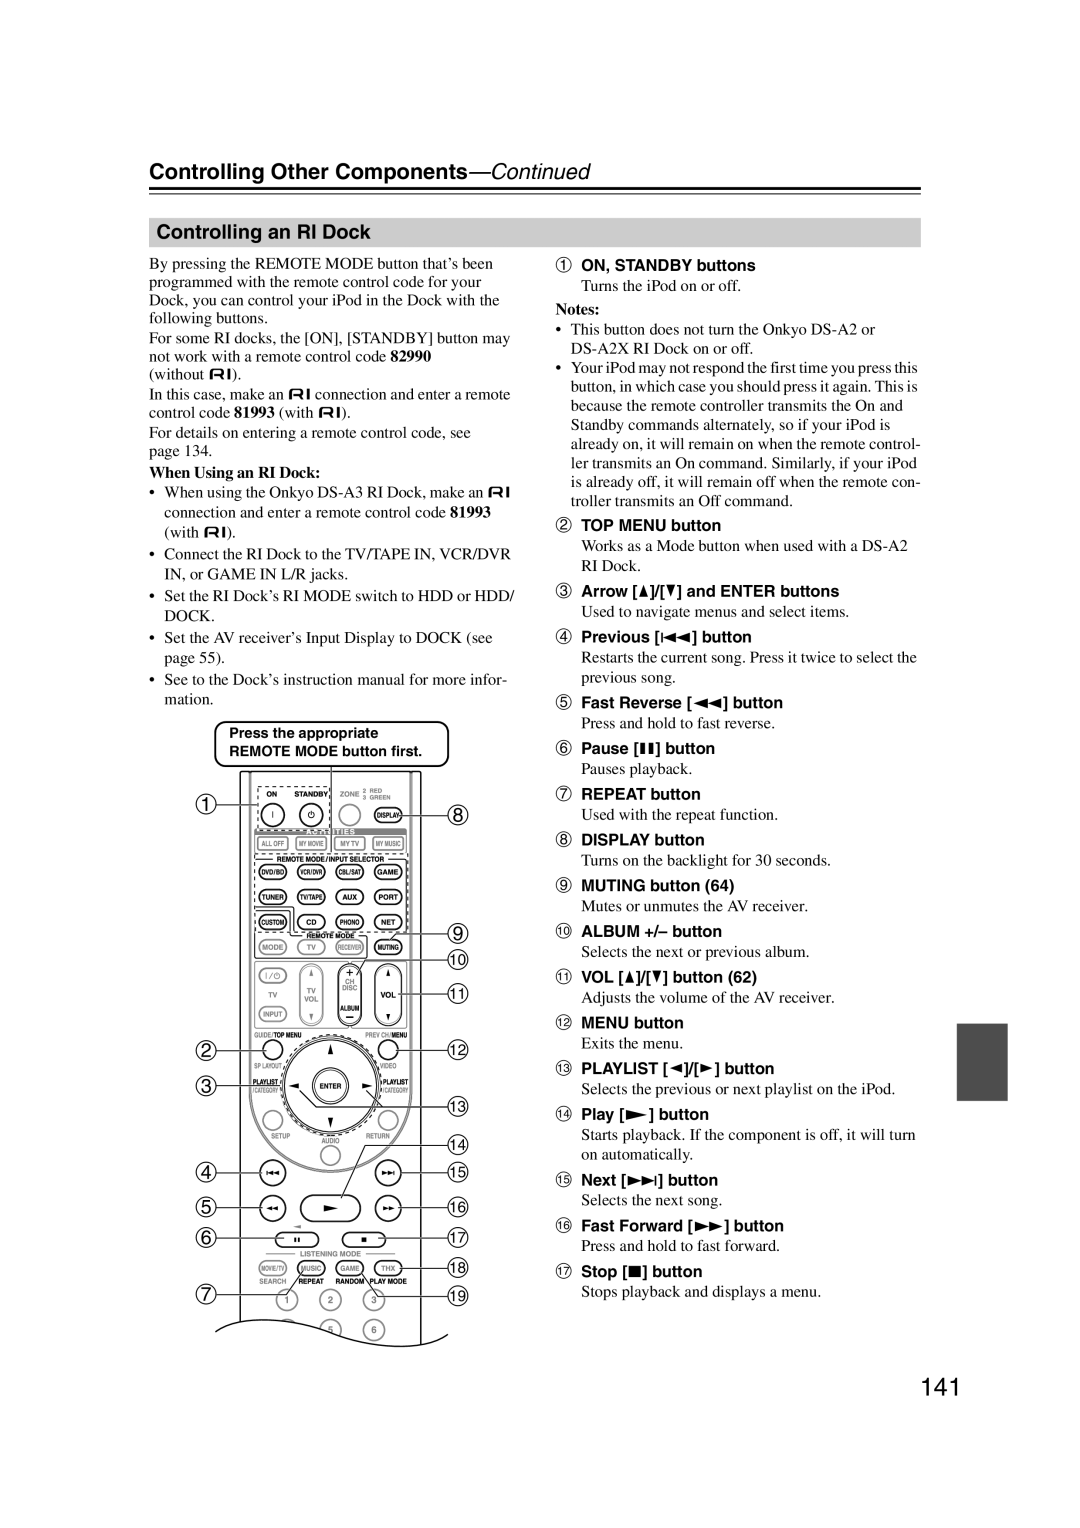 Onkyo TX-NR1007 instruction manual Controlling Other Components—Continued 